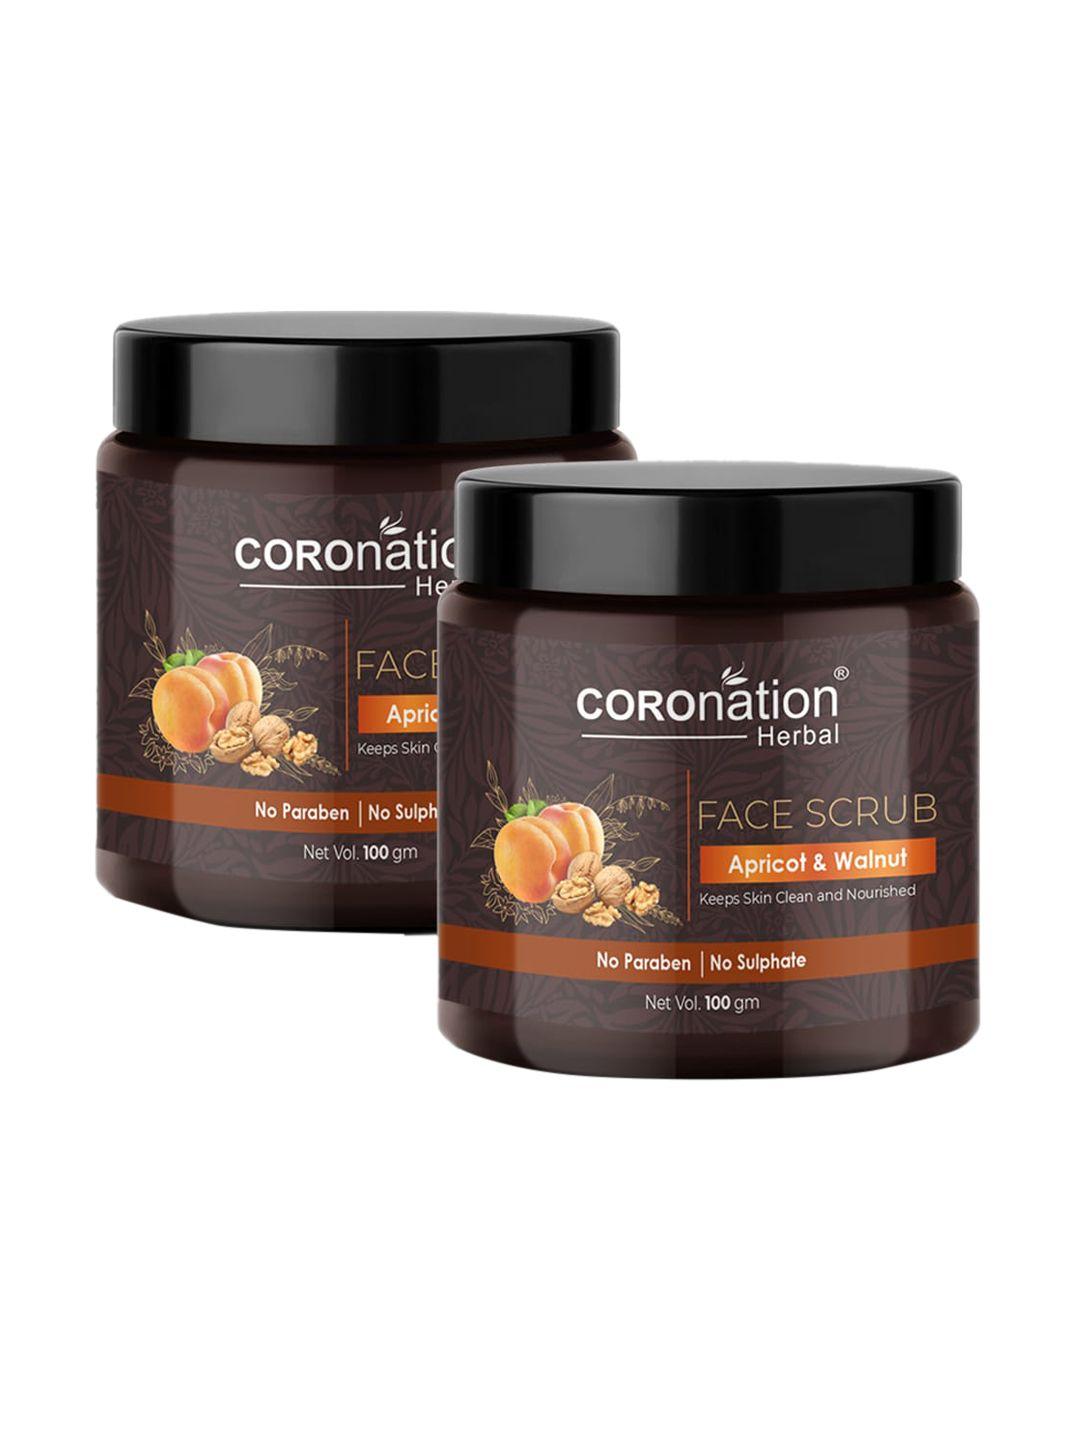 coronation herbal set of 2 apricot & walnut face scrub with sunflower oil - 100g each